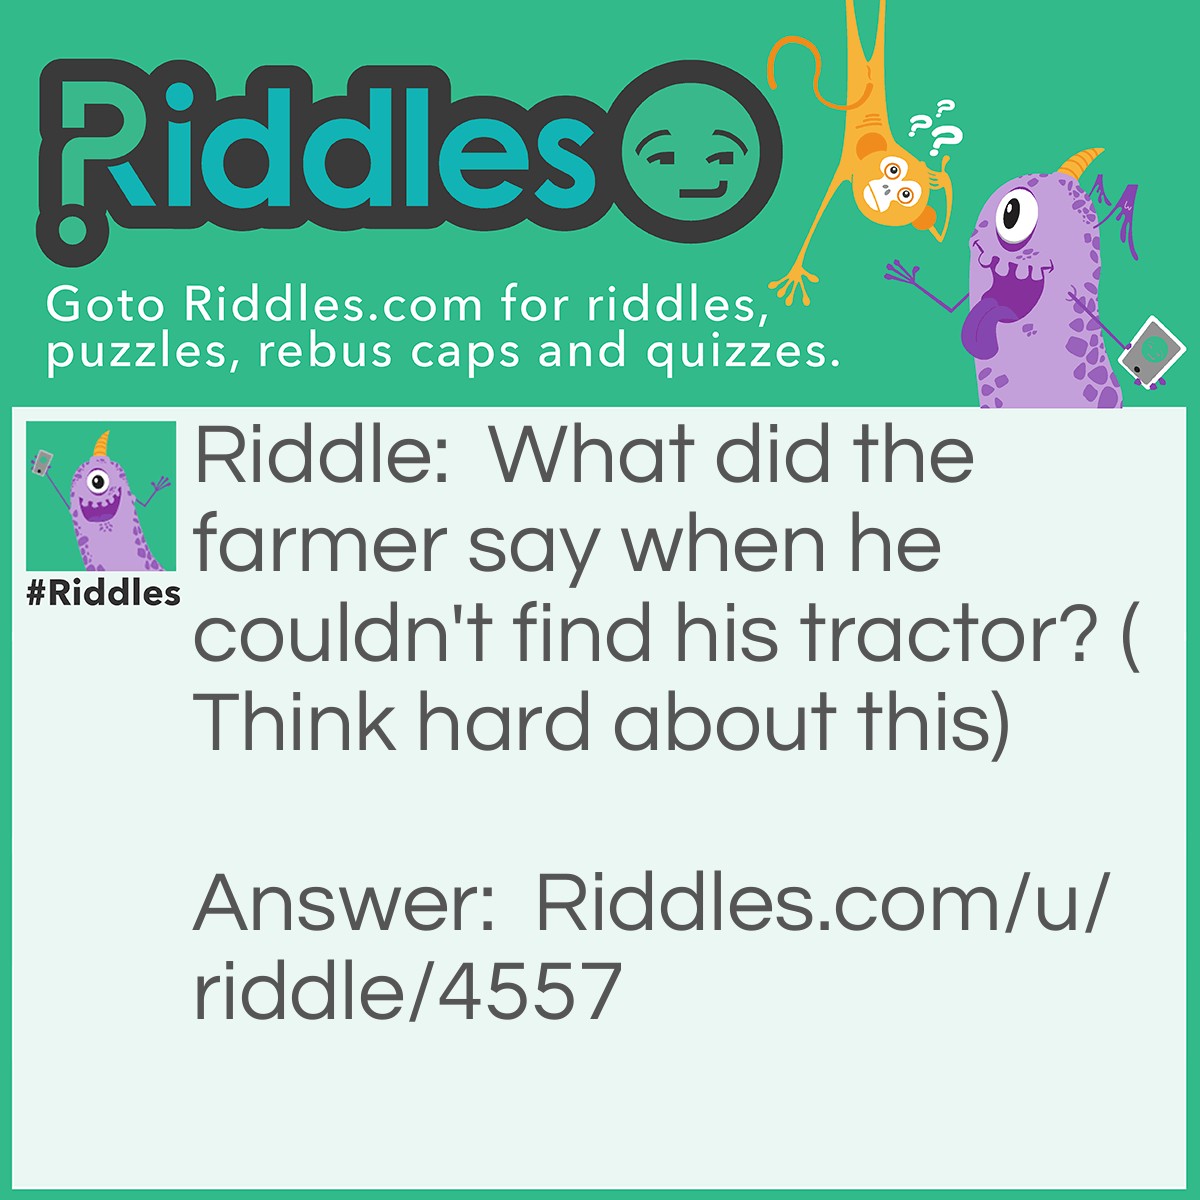 Riddle: What did the farmer say when he couldn't find his tractor? (Think hard about this) Answer: Where is my tractor?